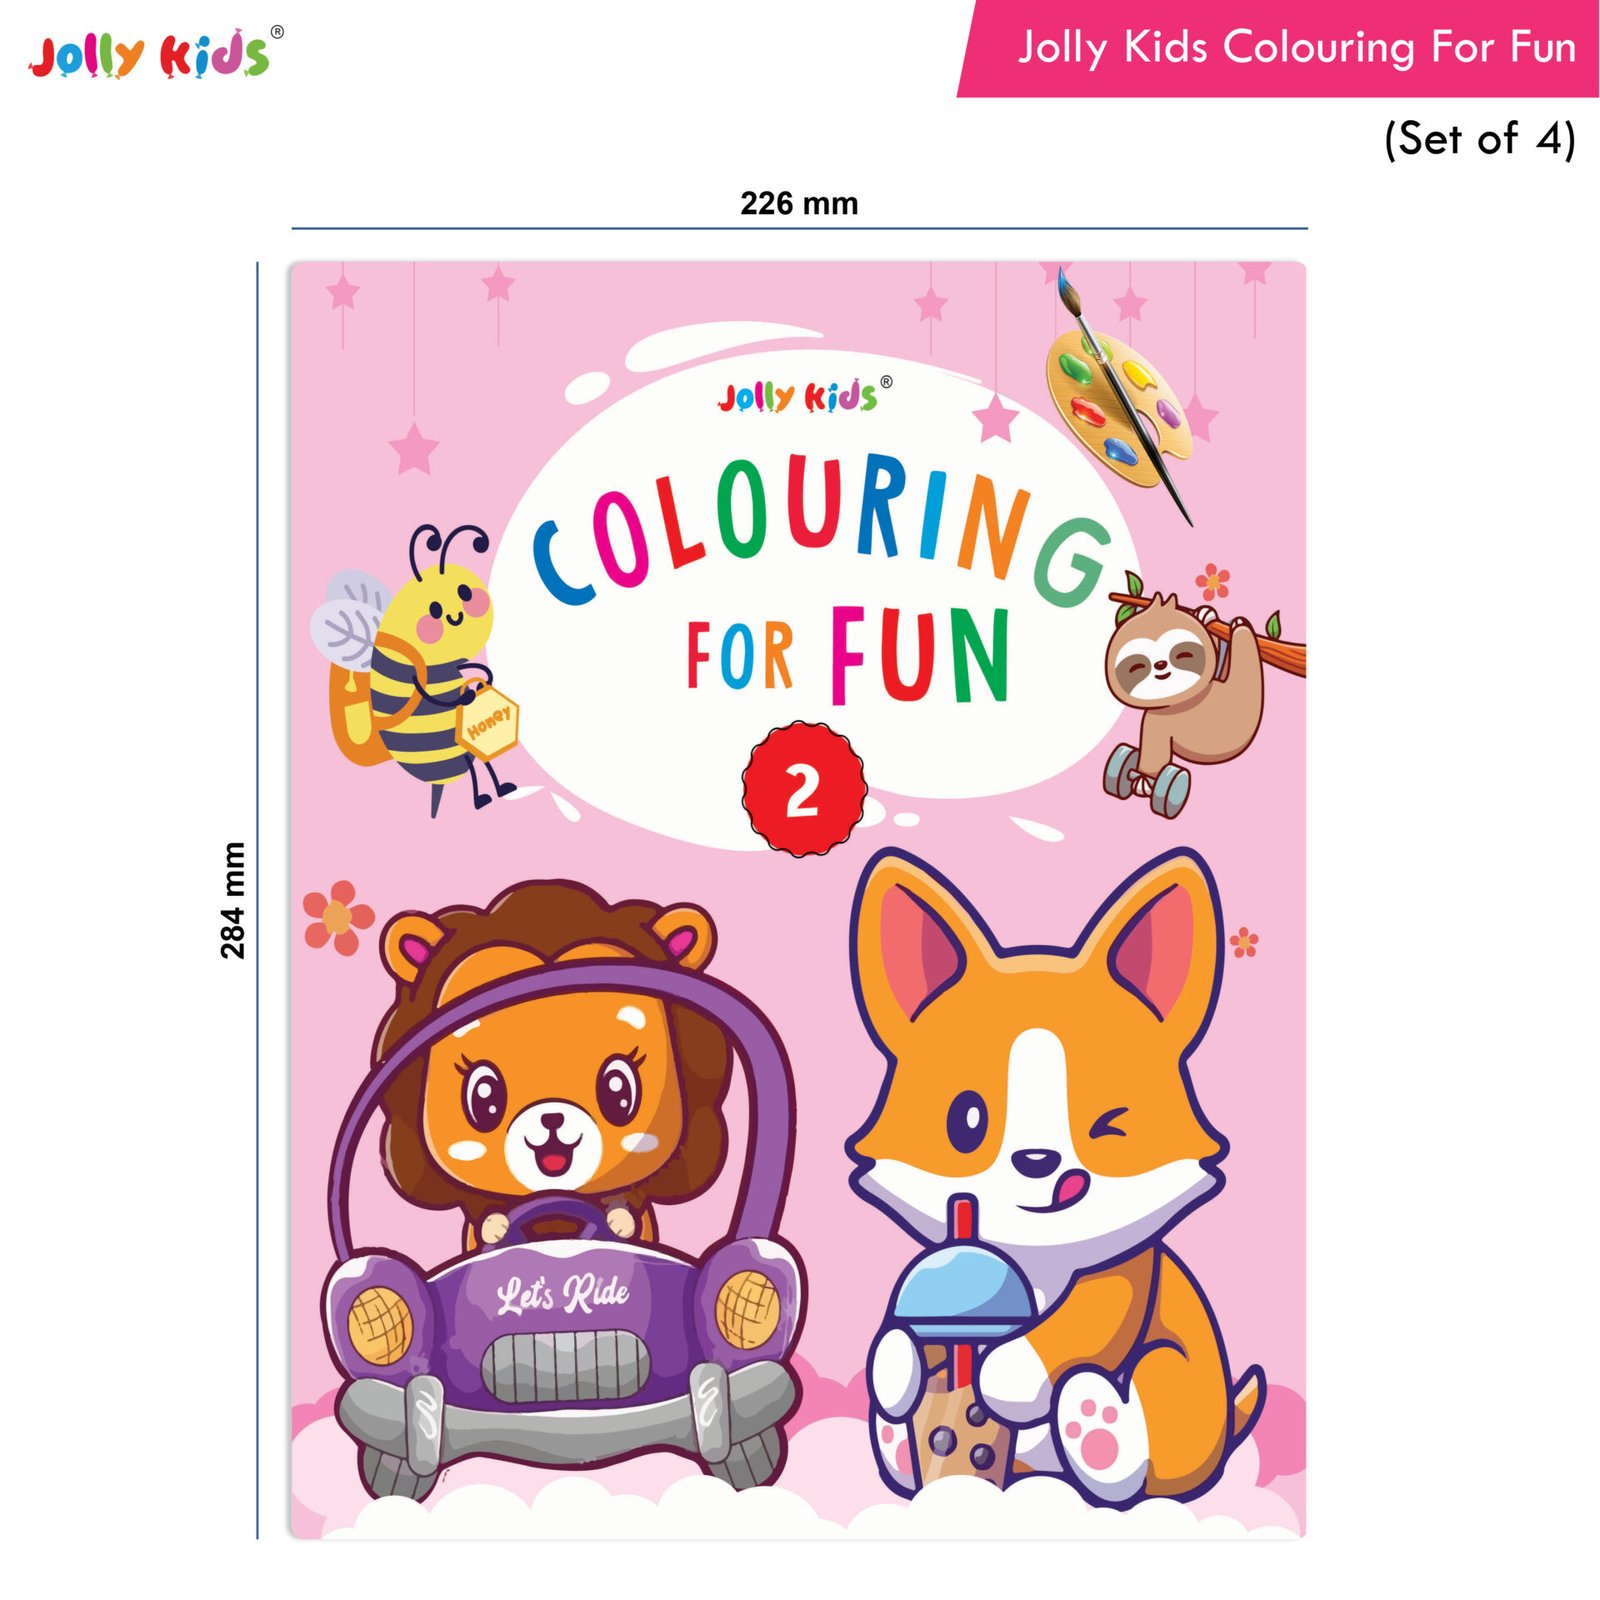 Jolly Kids Colouring For Fun Book Set of 4 1 4 2